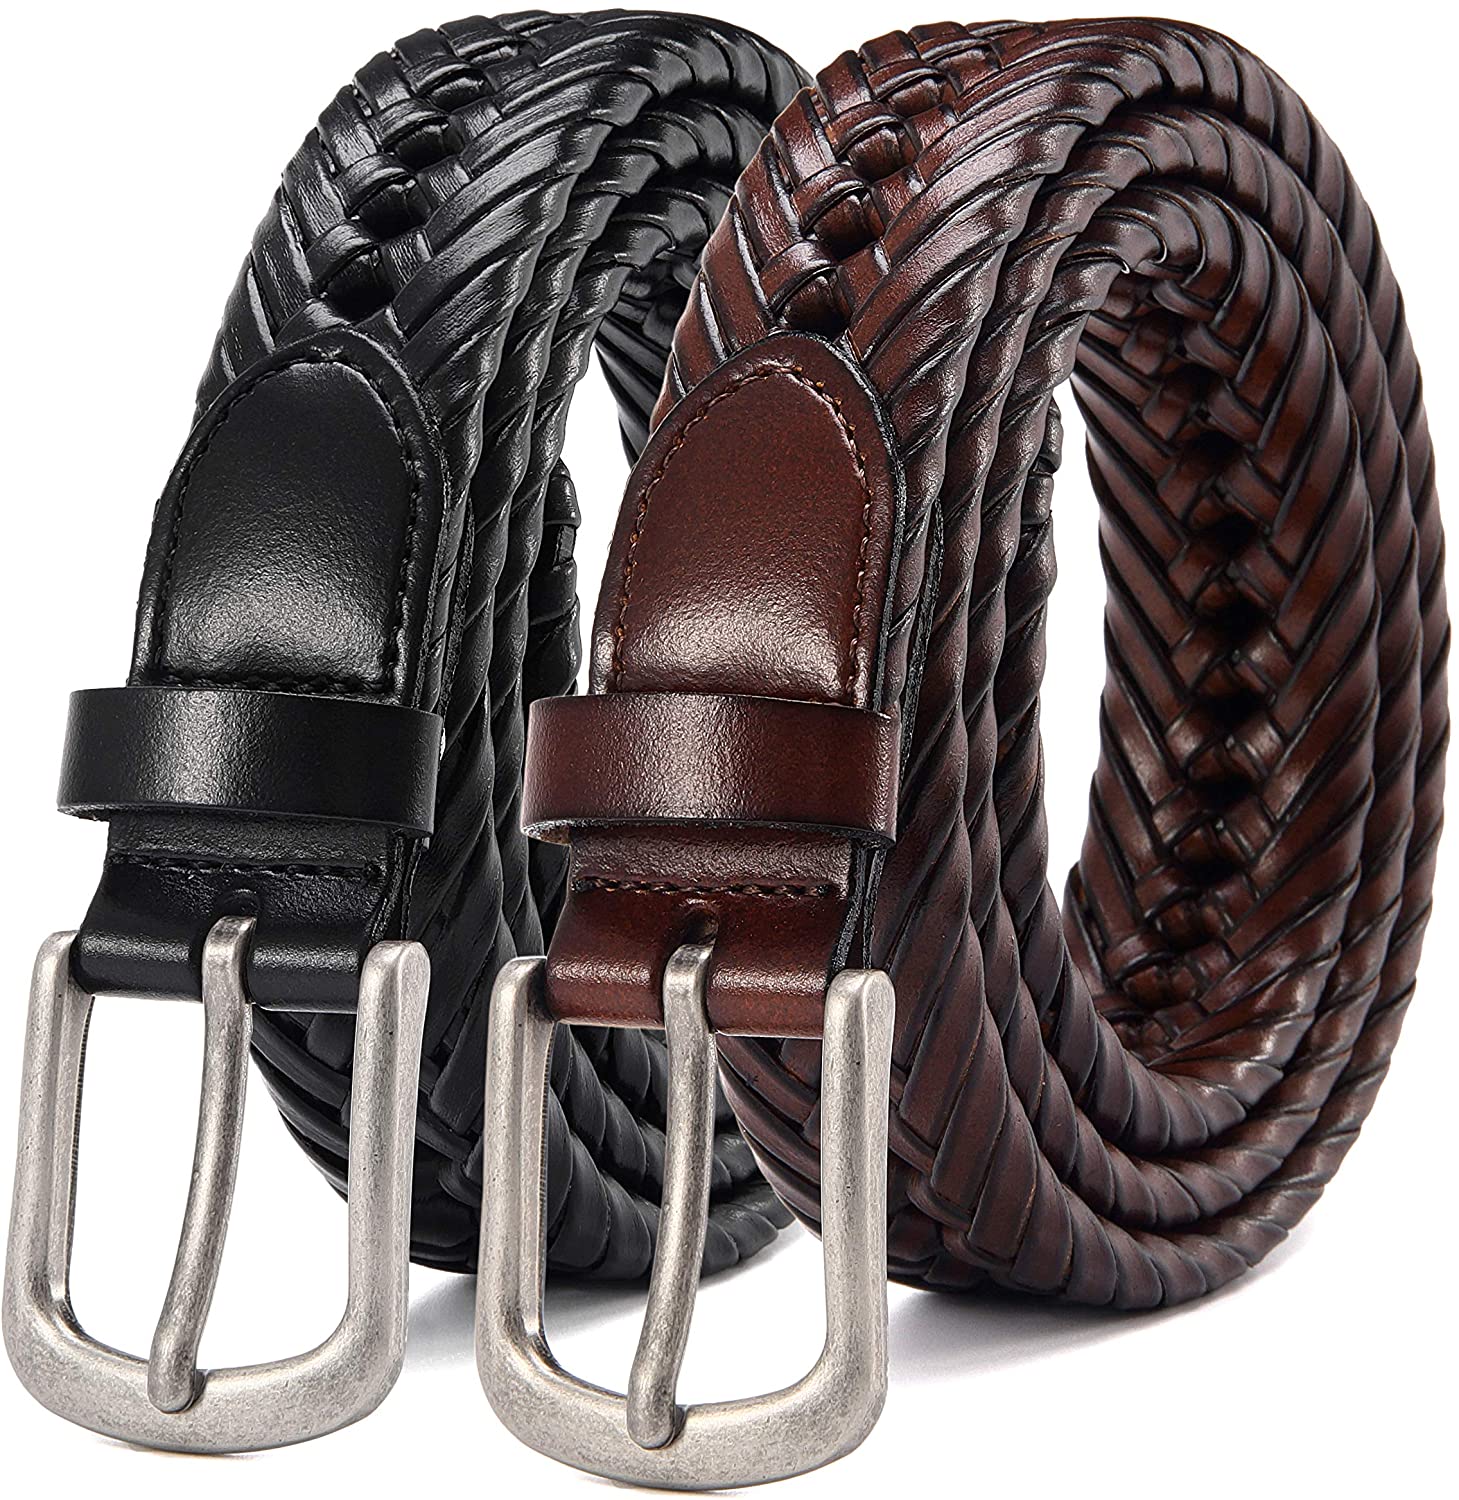 Mens Braided Leather Belt 2 Pack 1 1/4, Chaoren Braided Woven Belt for  Casual a